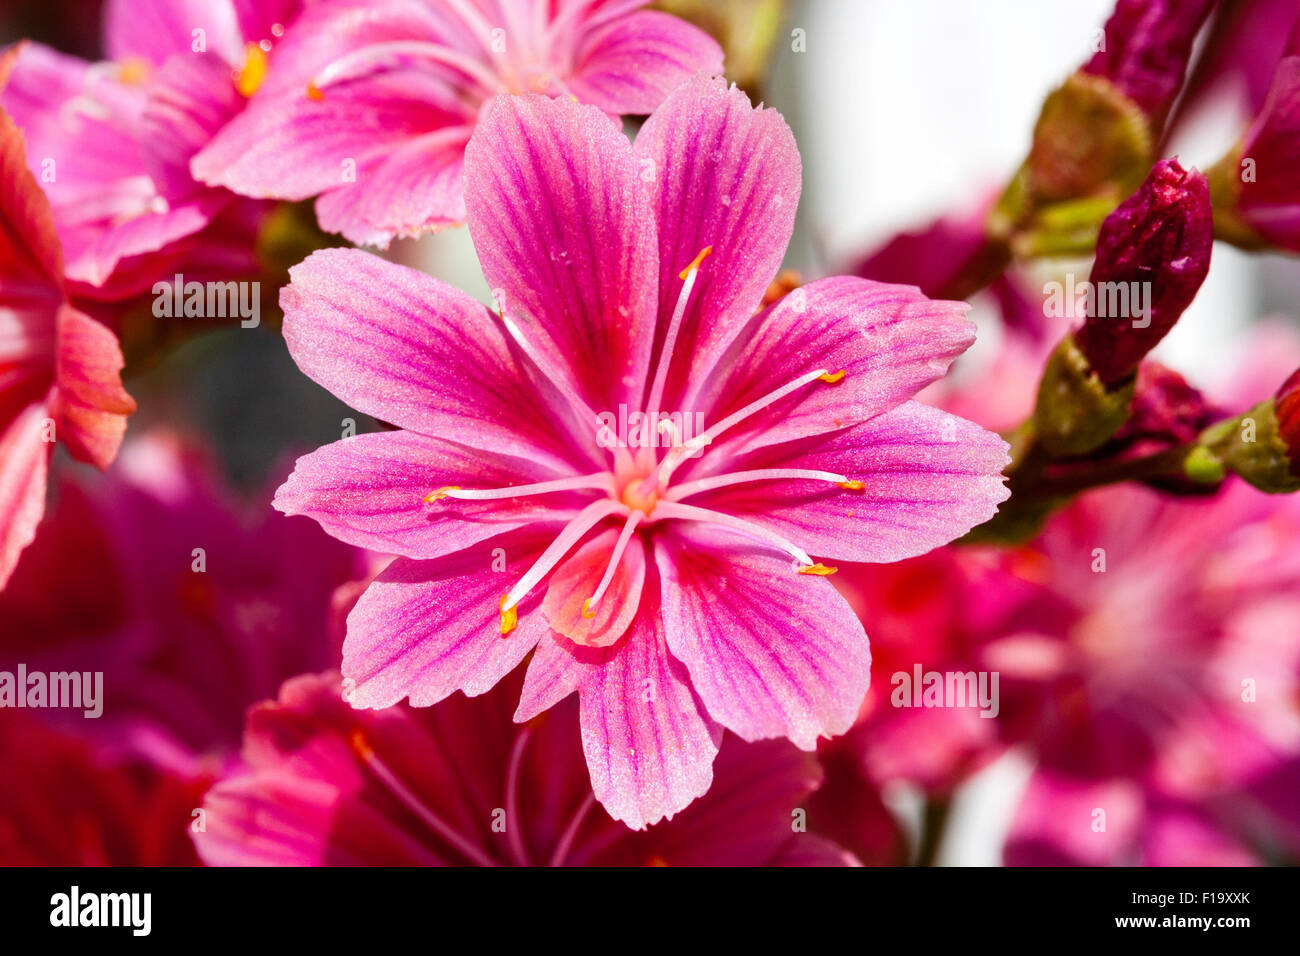 England. Garden flower, Lewisia, 'Lewisia cotyledon'. Flower is deep pink-red colour. Blossom fully open in direct sunlight. Marco shot. Stock Photo